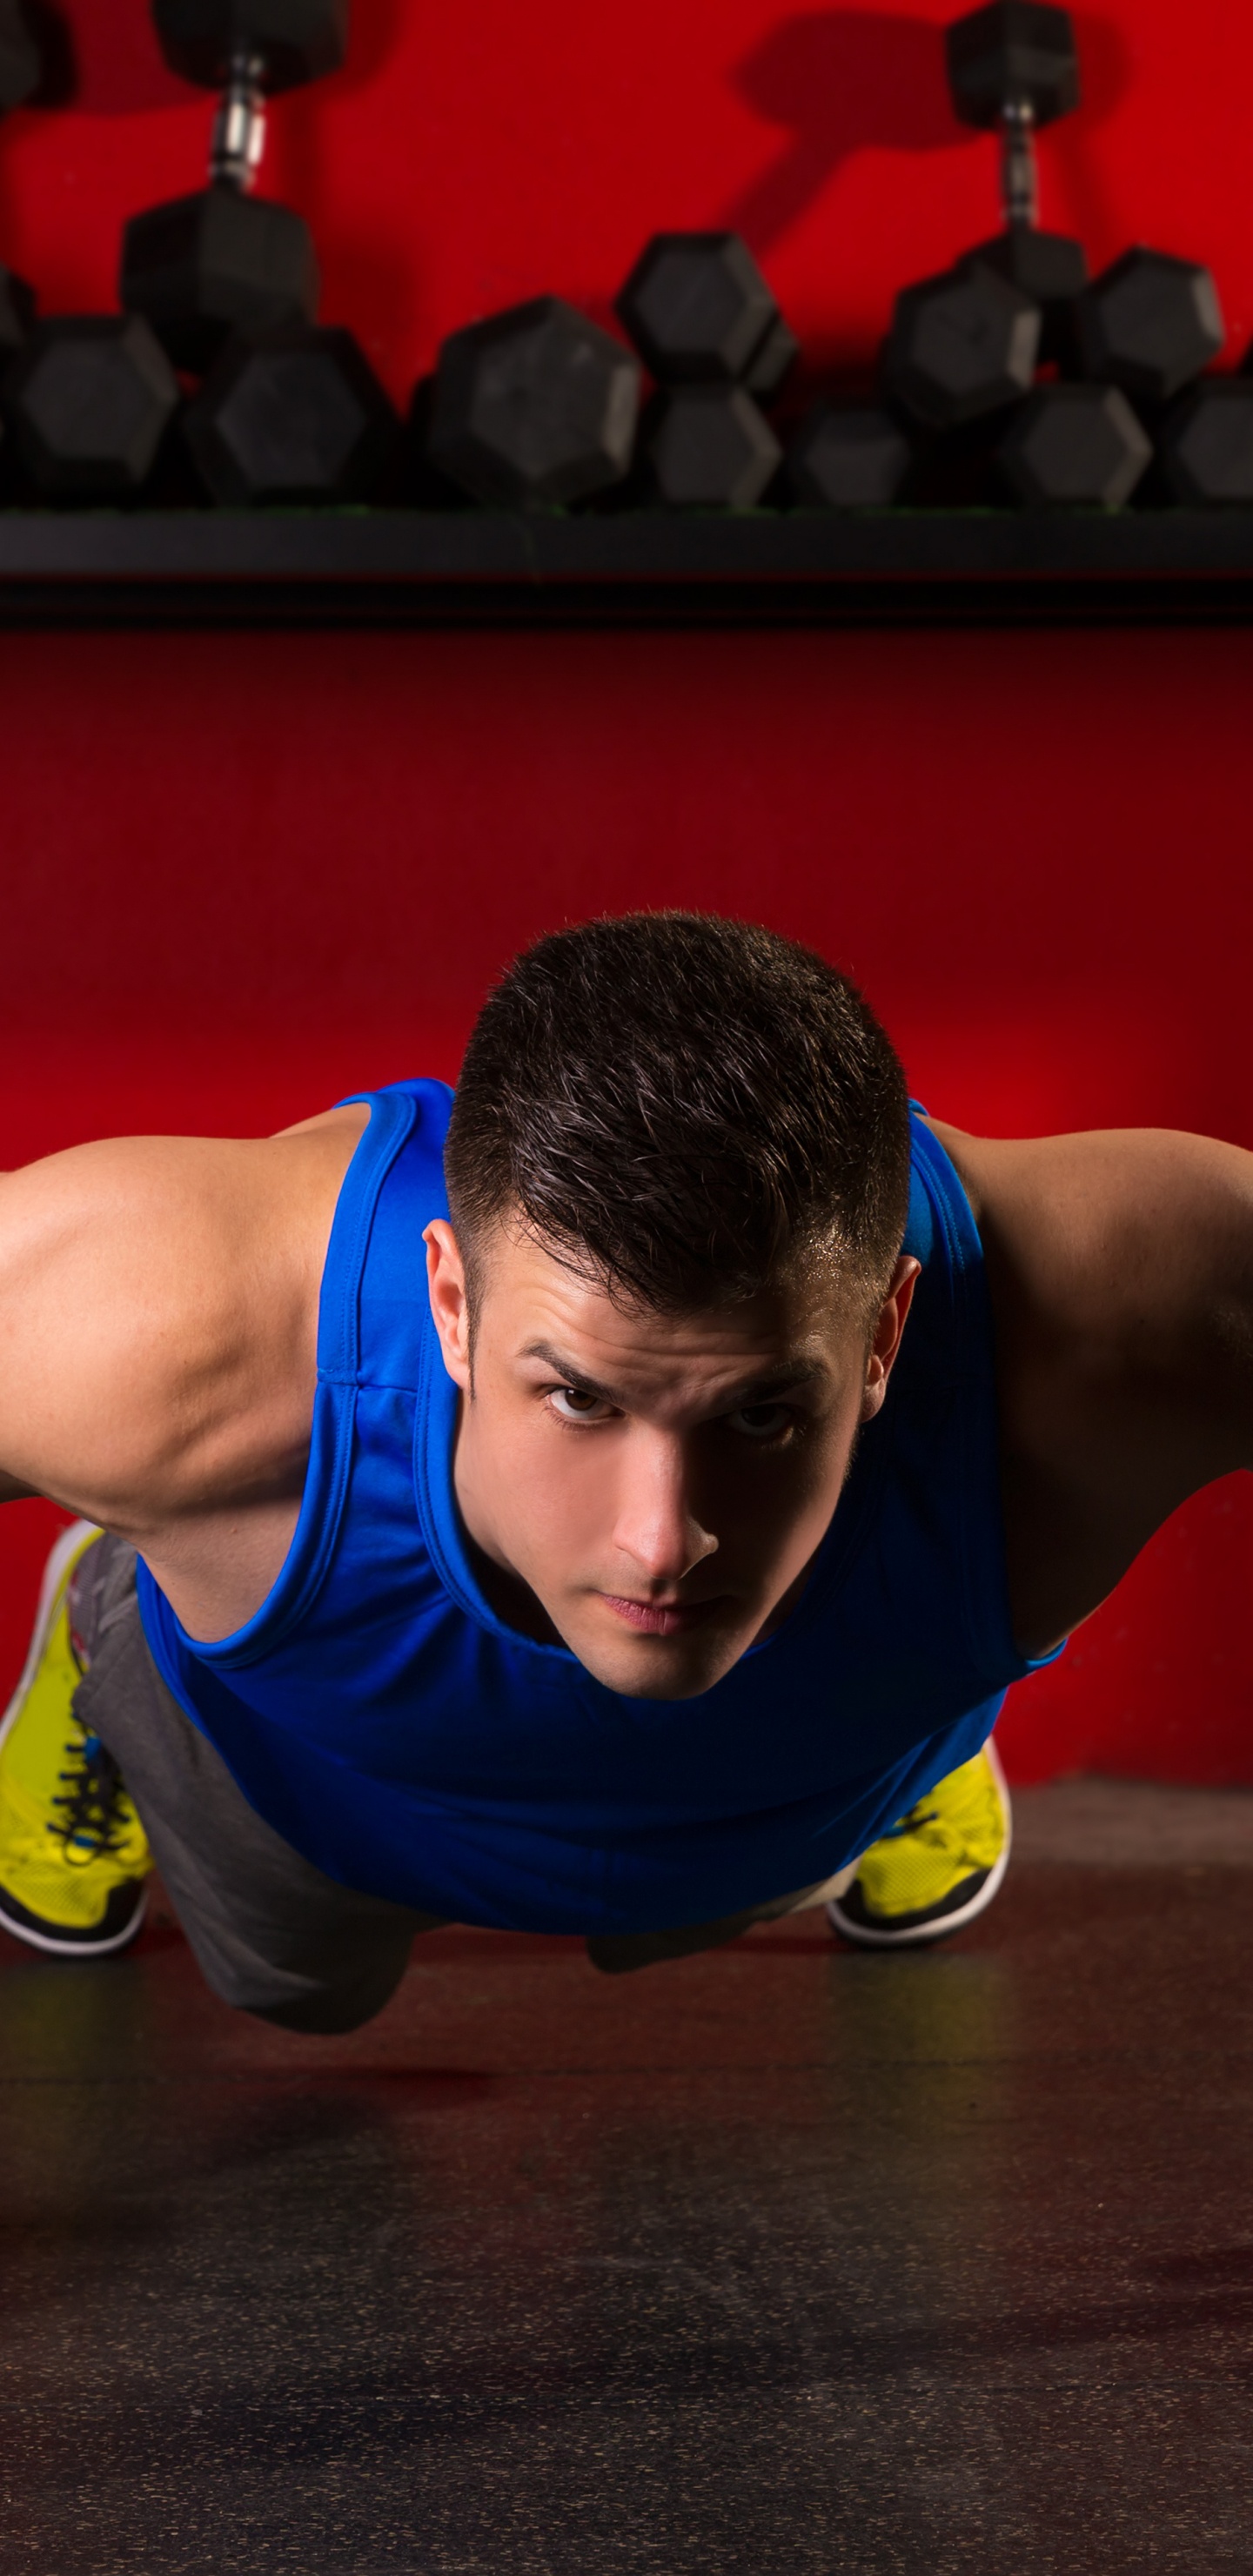 Man in Blue Tank Top and Black Shorts Doing Push Up. Wallpaper in 1440x2960 Resolution